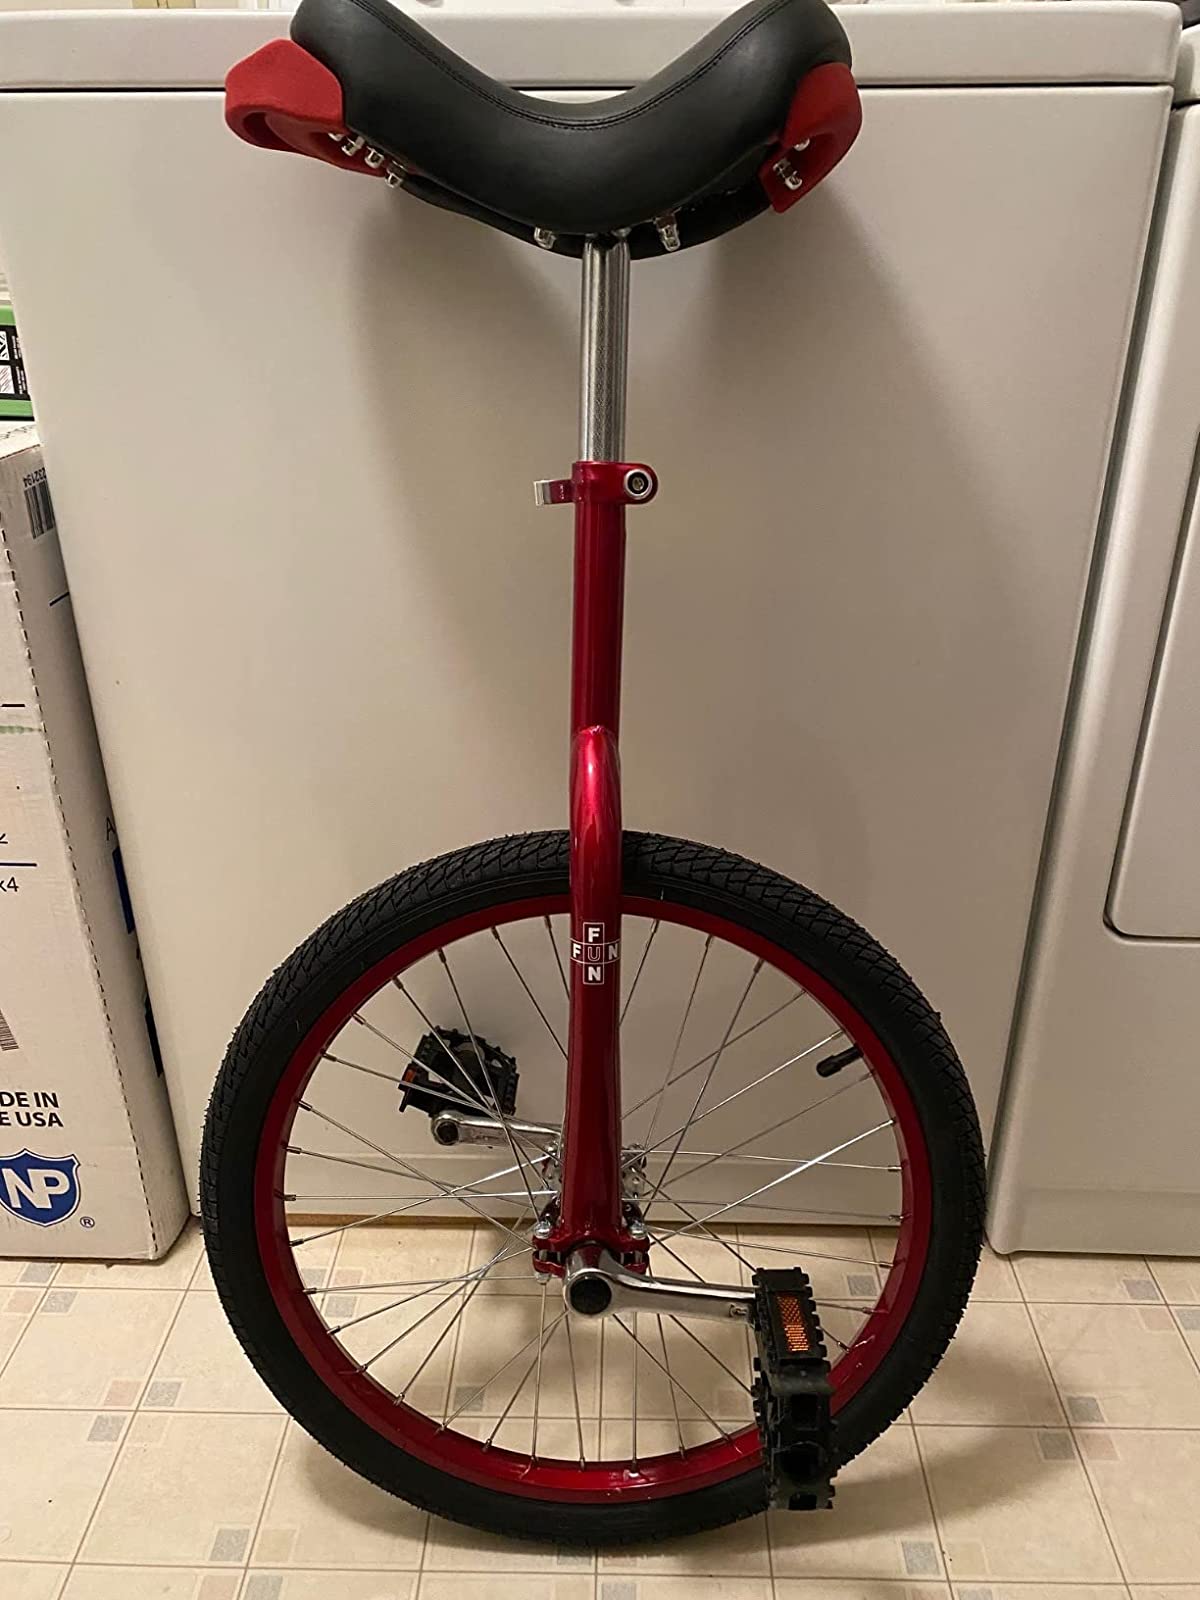 Premium Stable One Wheel Unicycle 20 photo review